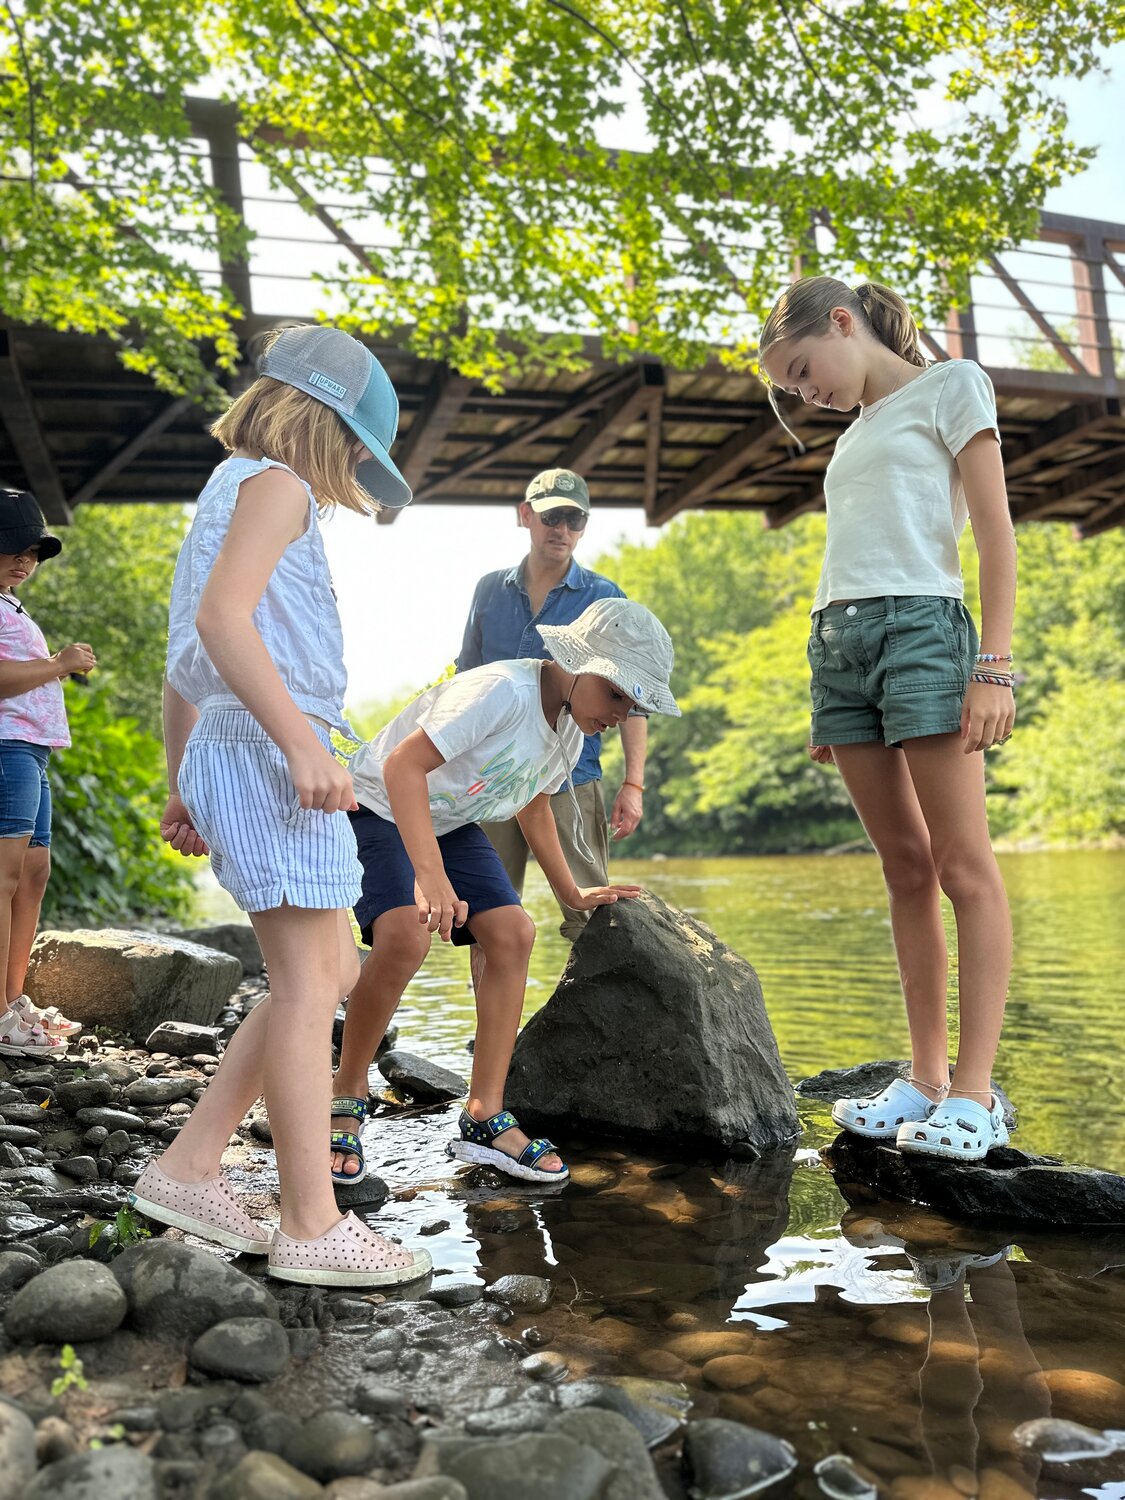 CFFCM Programming and Events Coordinator Todd Spire provided  fun and entertaining activities for children during Summerfest. Here the children were able to turn over rocks in the Willowemoc and find aquatic insects and bottom-living creatures.